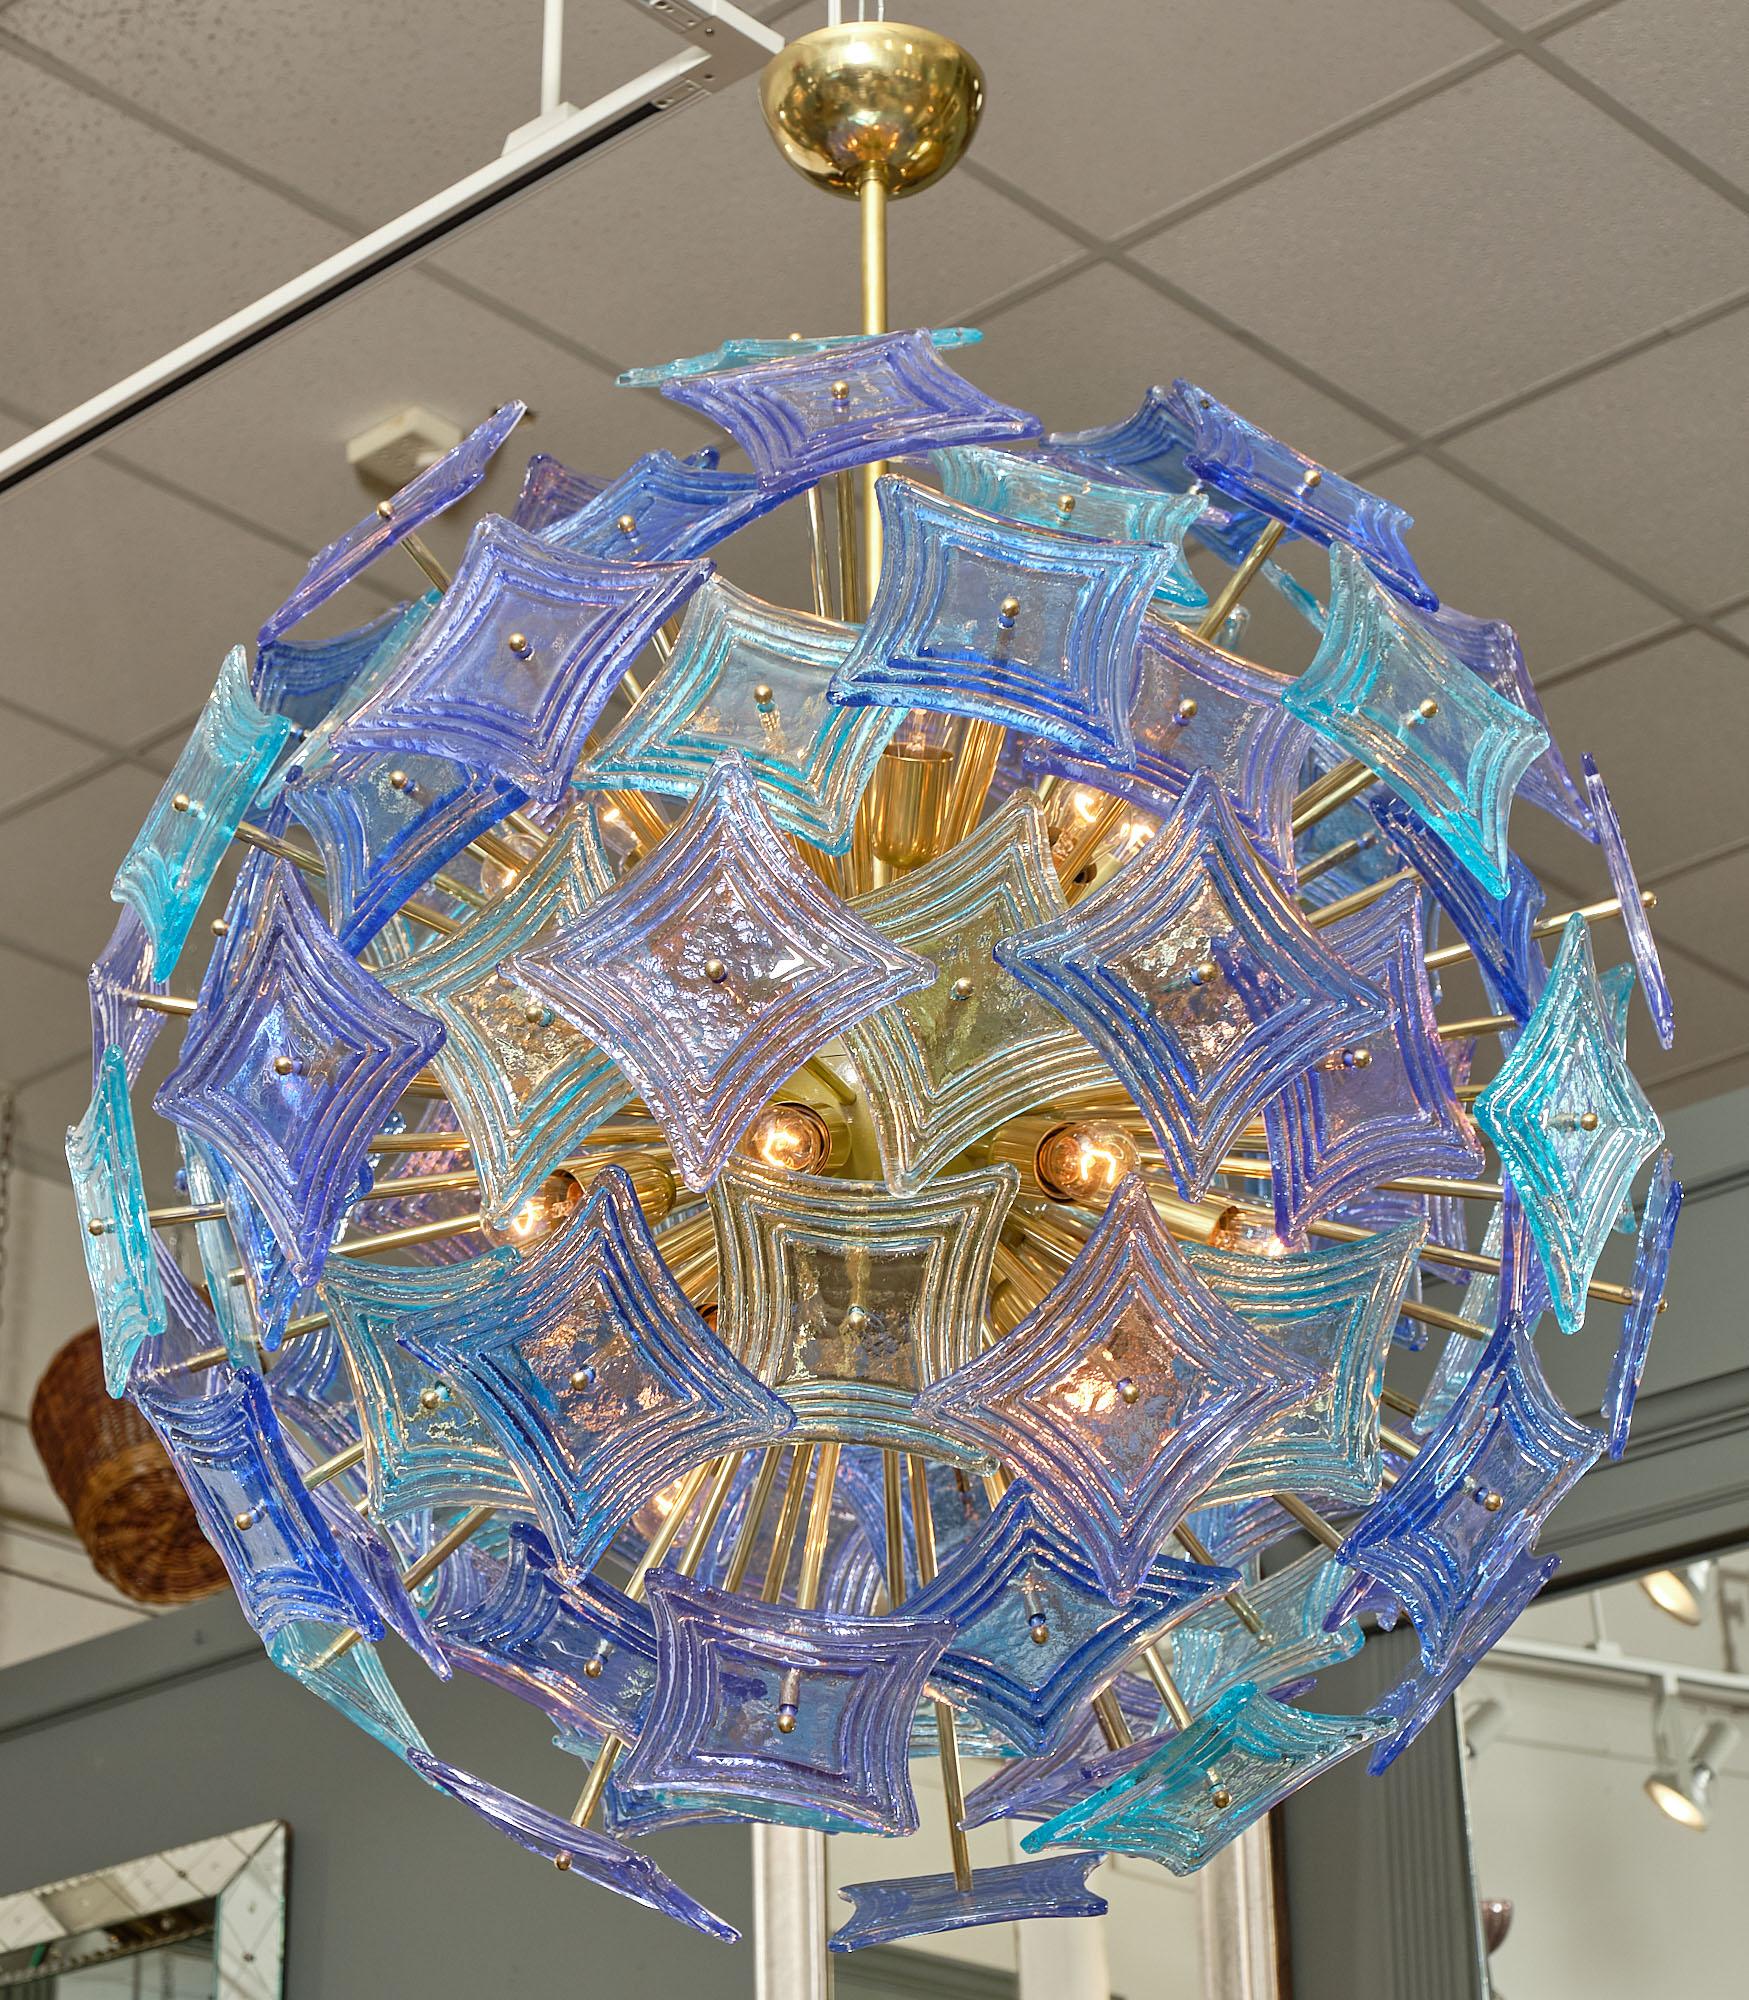 A Murano glass “sputnik” chandelier featuring multiple purple and blue square ridged components. They are supported by a gilt brass structure. This hand-blown fixture has been newly wired to fit US standards.

This piece is a special order from